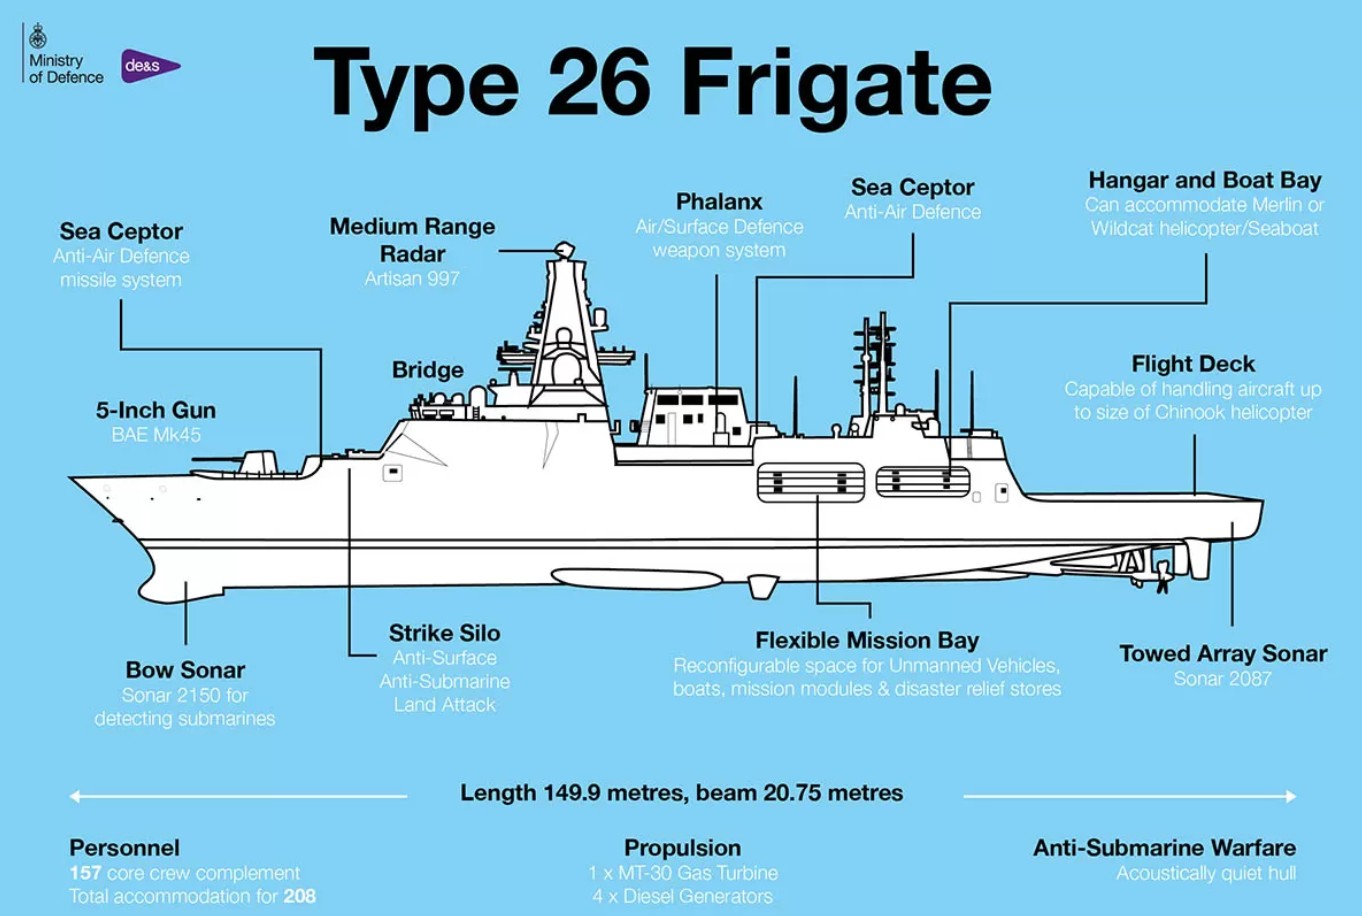 type 26 city class multi-mission frigate ffg global combat ship royal navy 09 graphic